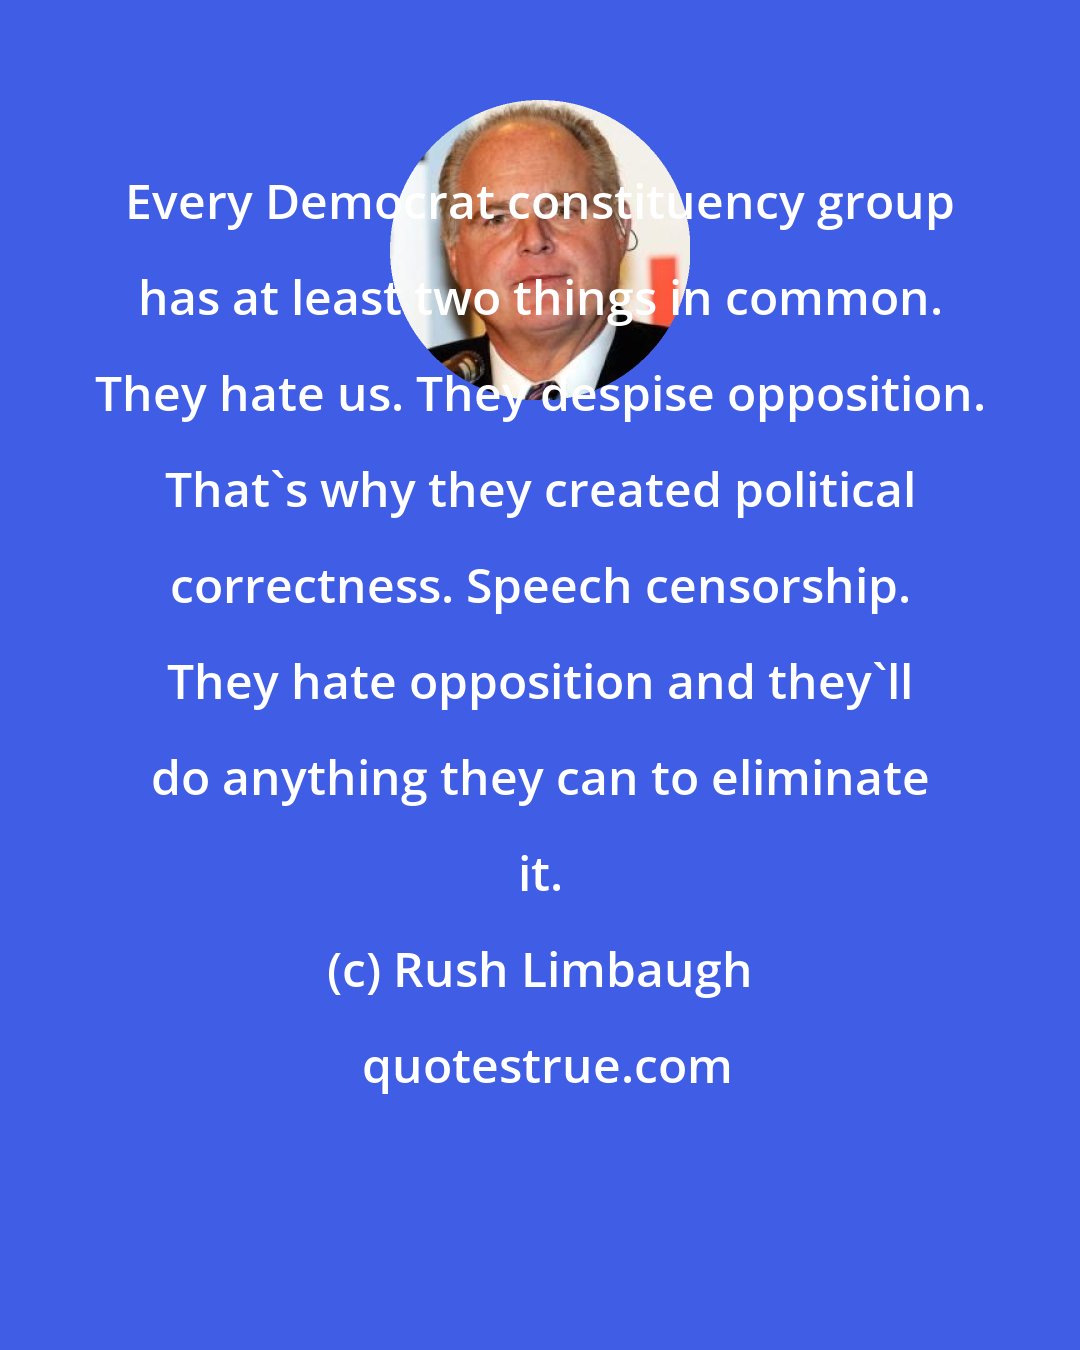 Rush Limbaugh: Every Democrat constituency group has at least two things in common. They hate us. They despise opposition. That's why they created political correctness. Speech censorship. They hate opposition and they'll do anything they can to eliminate it.